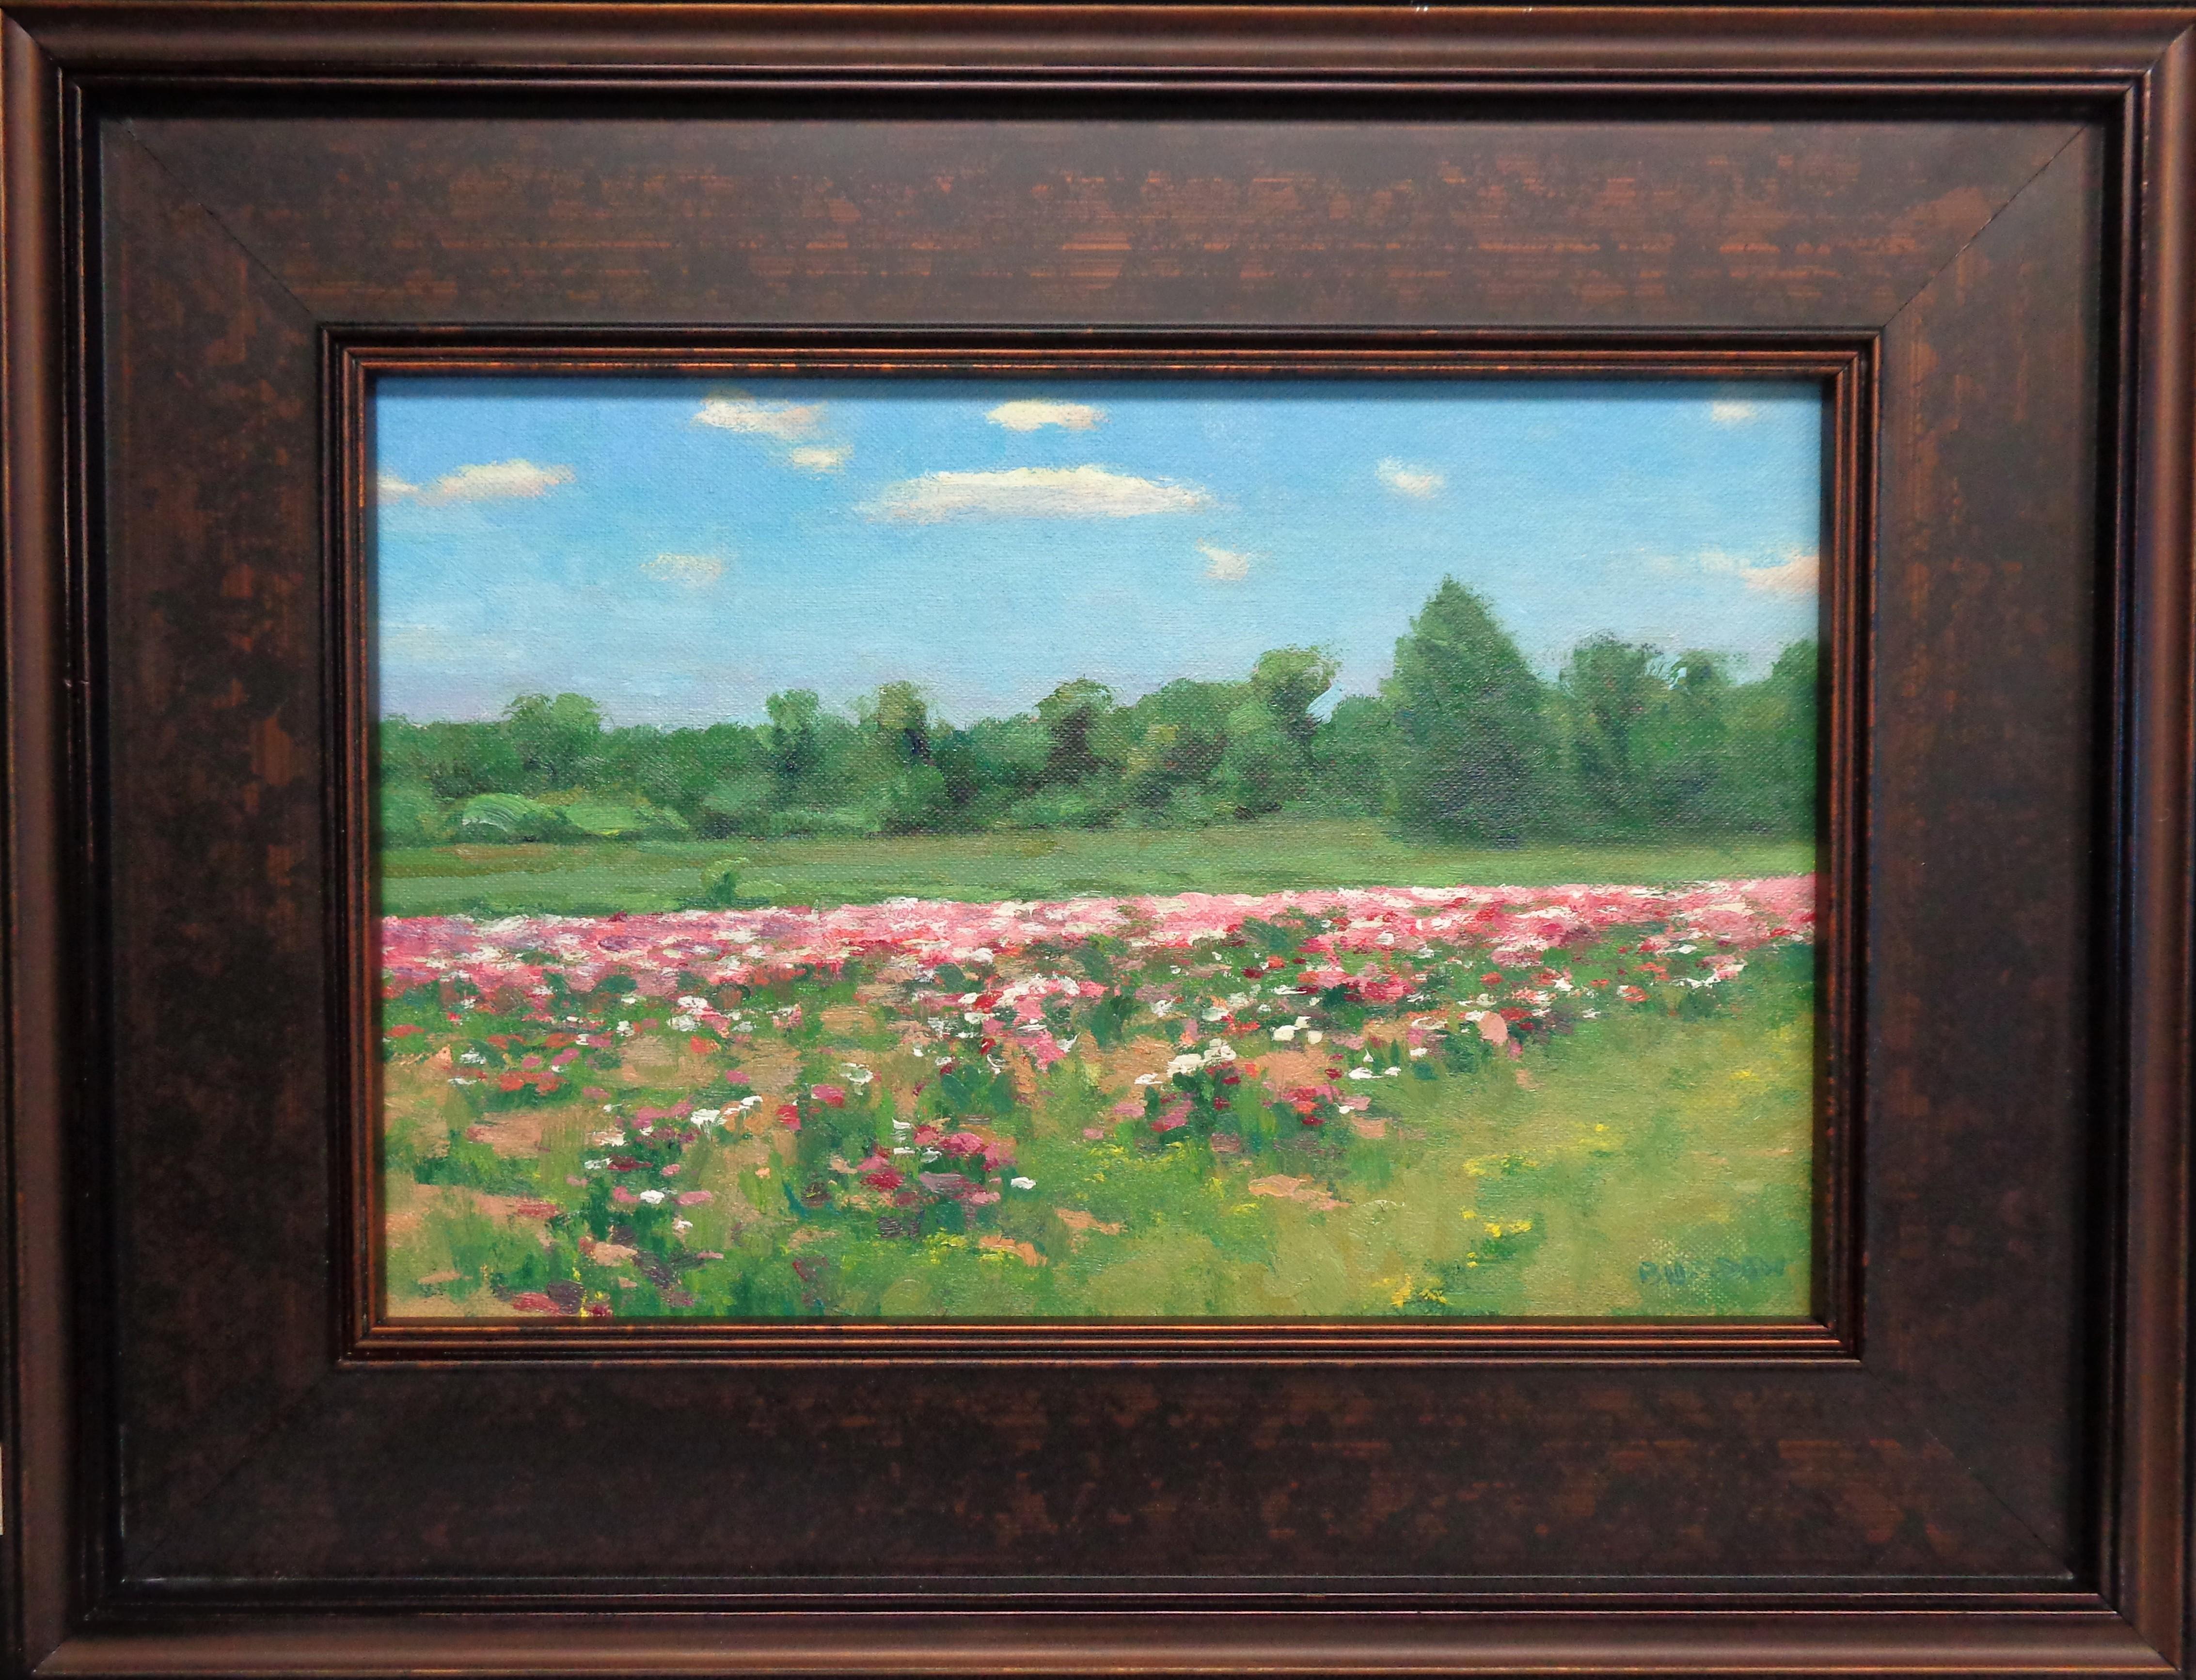 Show Stoppers is an oil painting on canvas panel that showcases the beautiful light of a summer day shinning on a Show Stopping field of flowers painted direct on location en plein air.  This was an incredible day with perfect conditions both